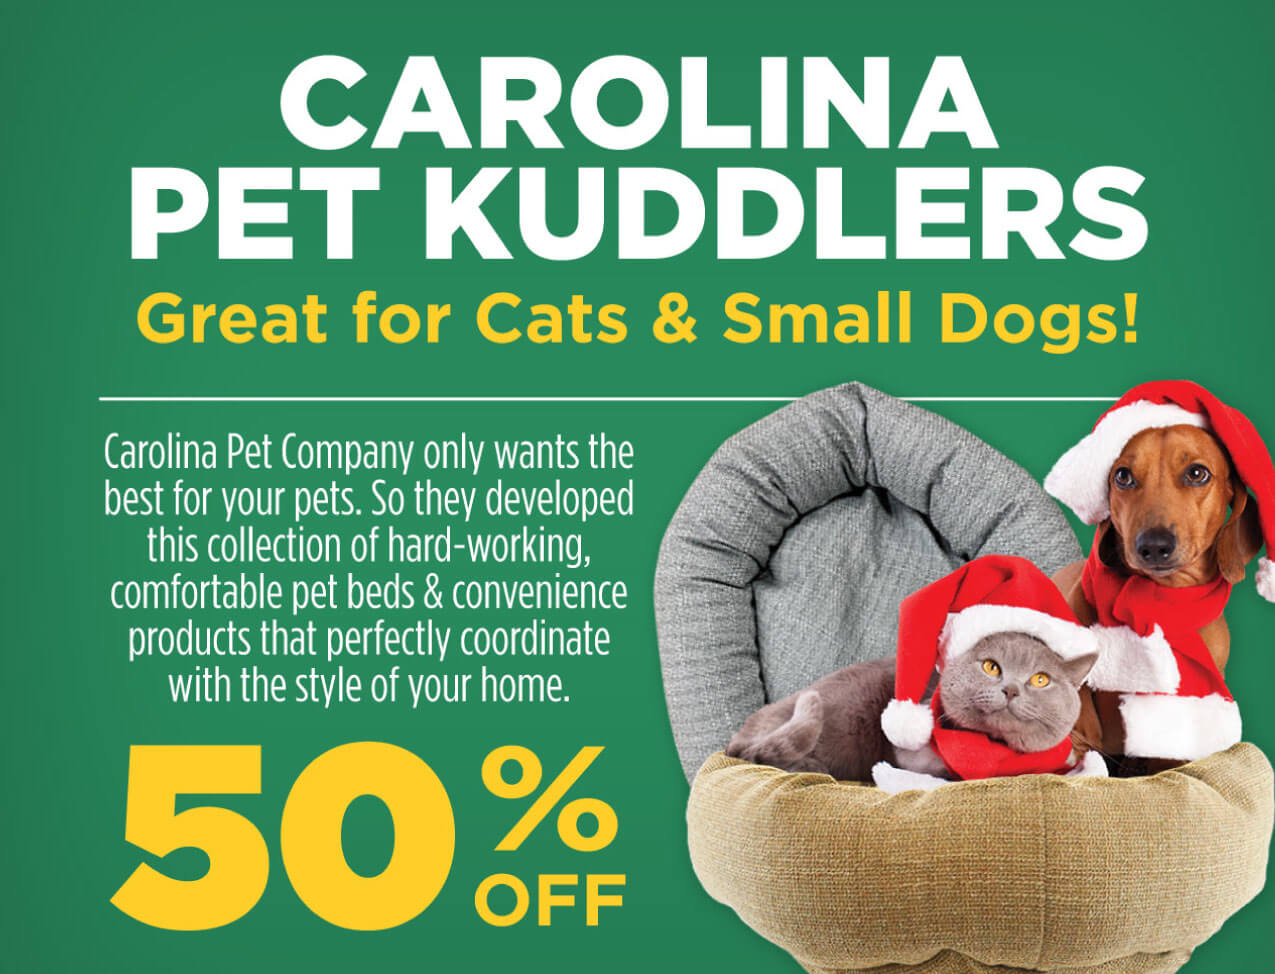 50% Off Carolina Pet Kuddlers (Great for Cats & Small Dogs! USA Made!)